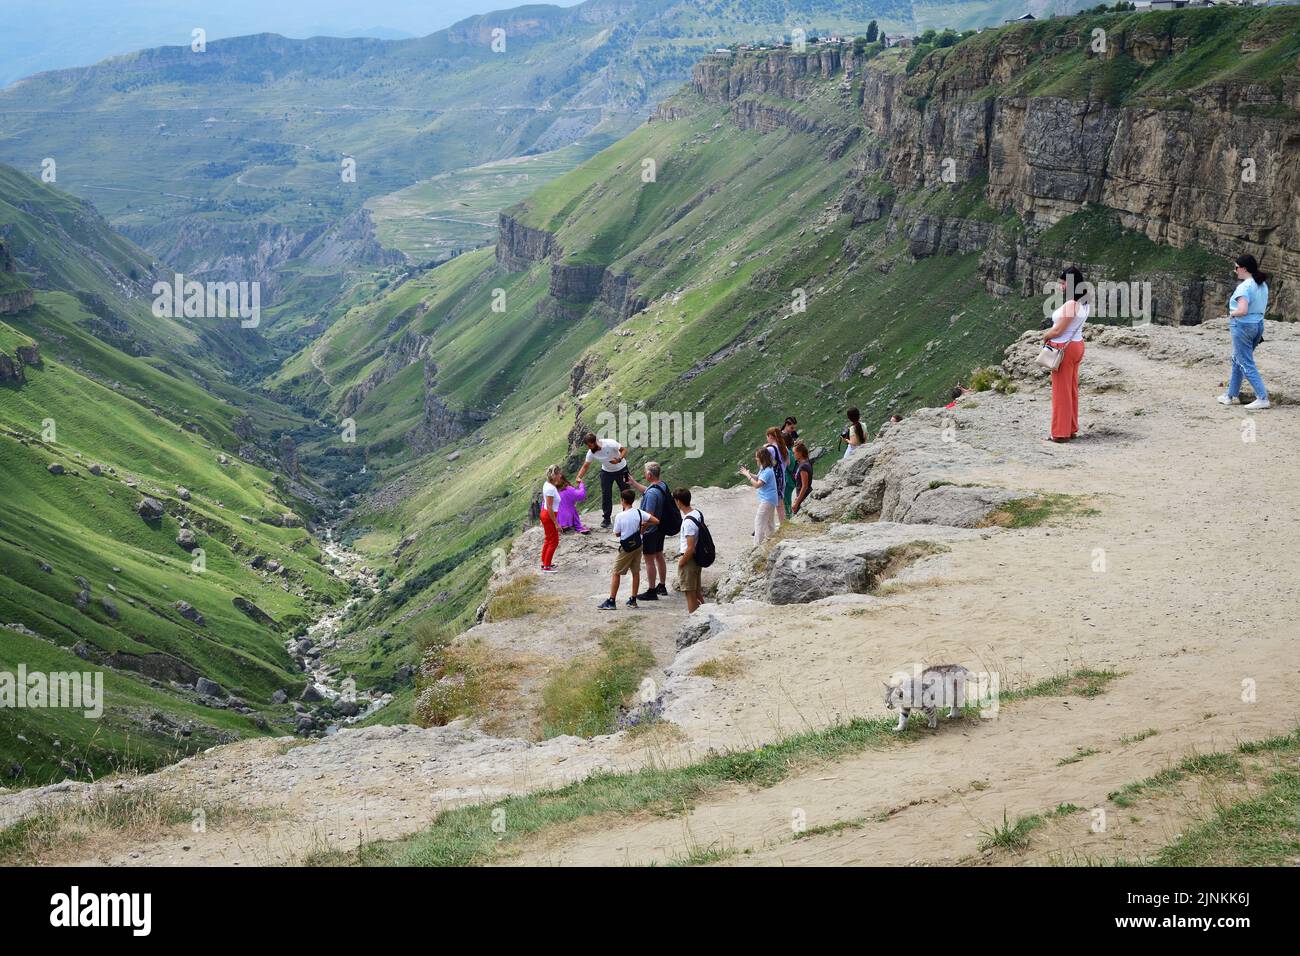 Dagestan, Russia - 21 July, 2022: People on the edge of the Khunzakh Canyon in the Republic of Dagestan, Russia. Stunning landscape of the Caucasus mo Stock Photo